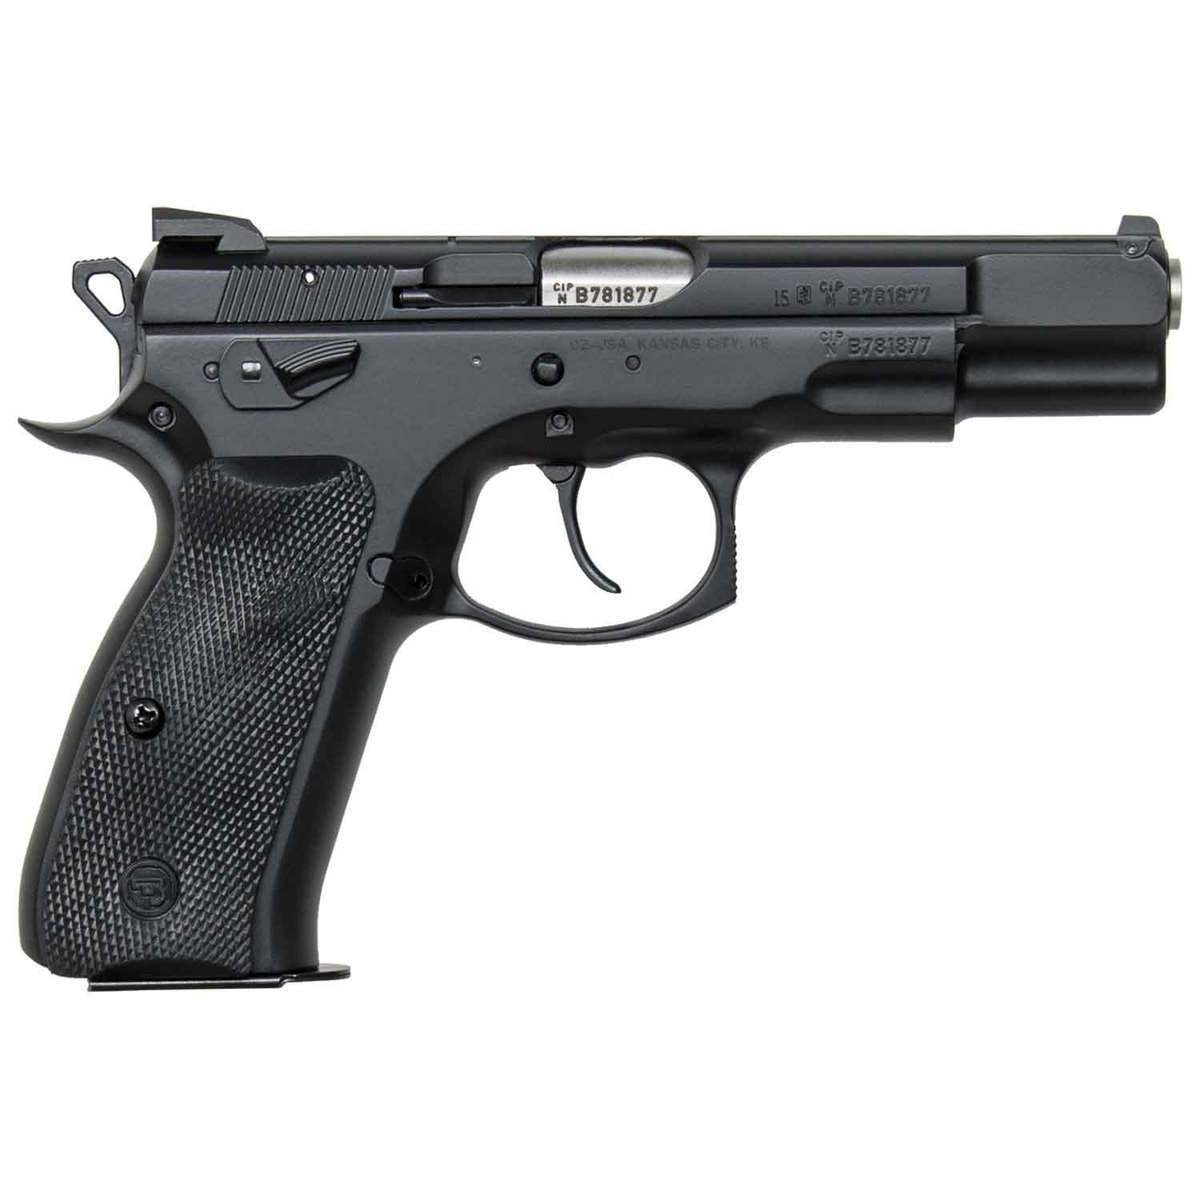 cz-75-b-omega-convertible-9mm-luger-46in-black-pistol-161-rounds-1433401-1.jpg